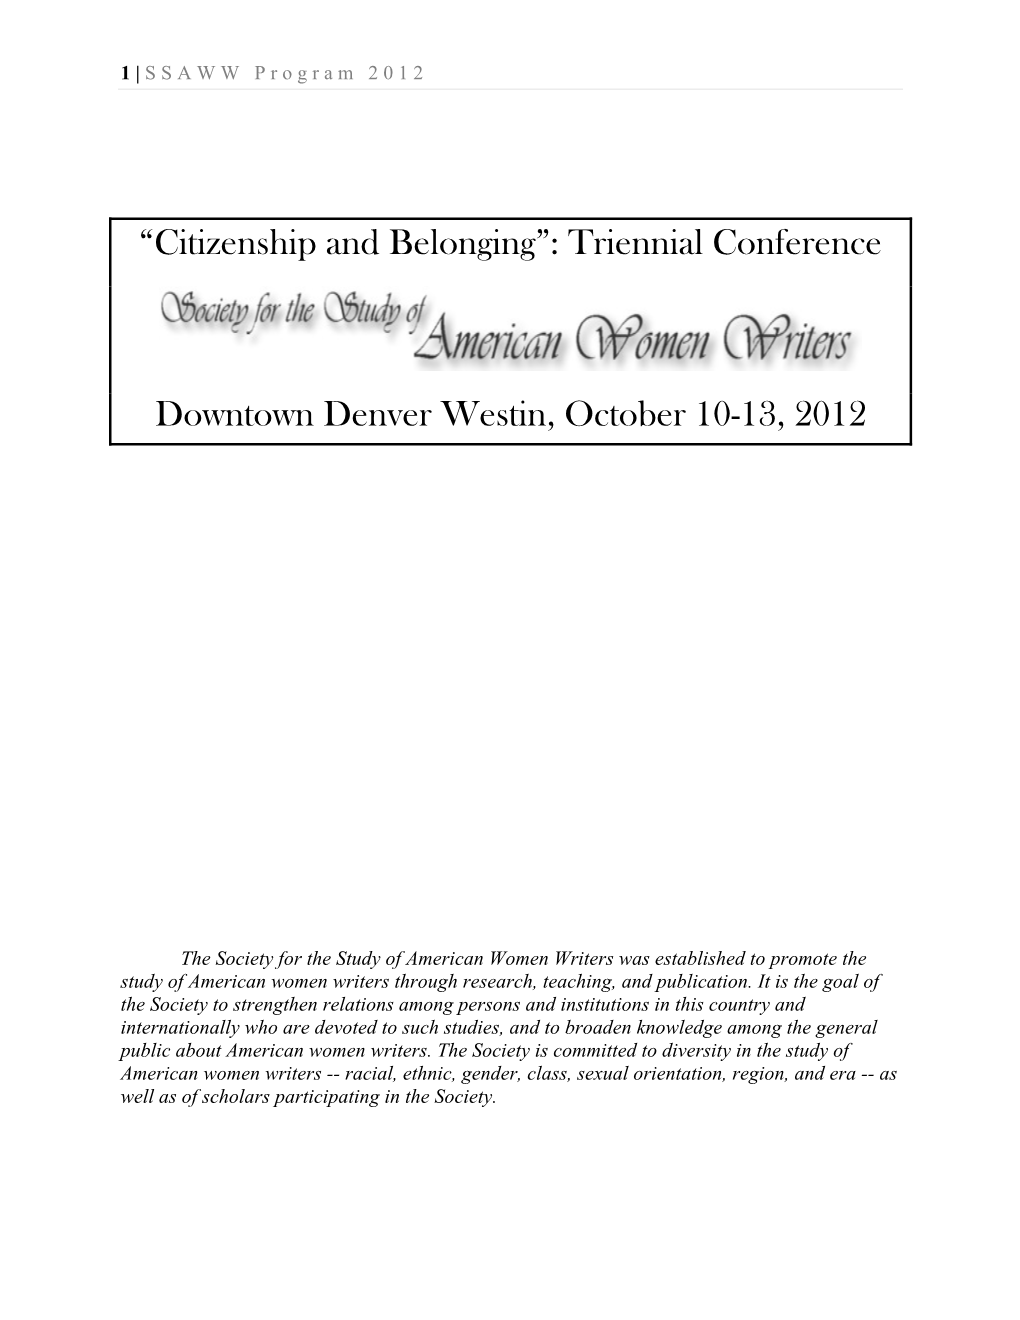 “Citizenship and Belonging”: Triennial Conference Downtown